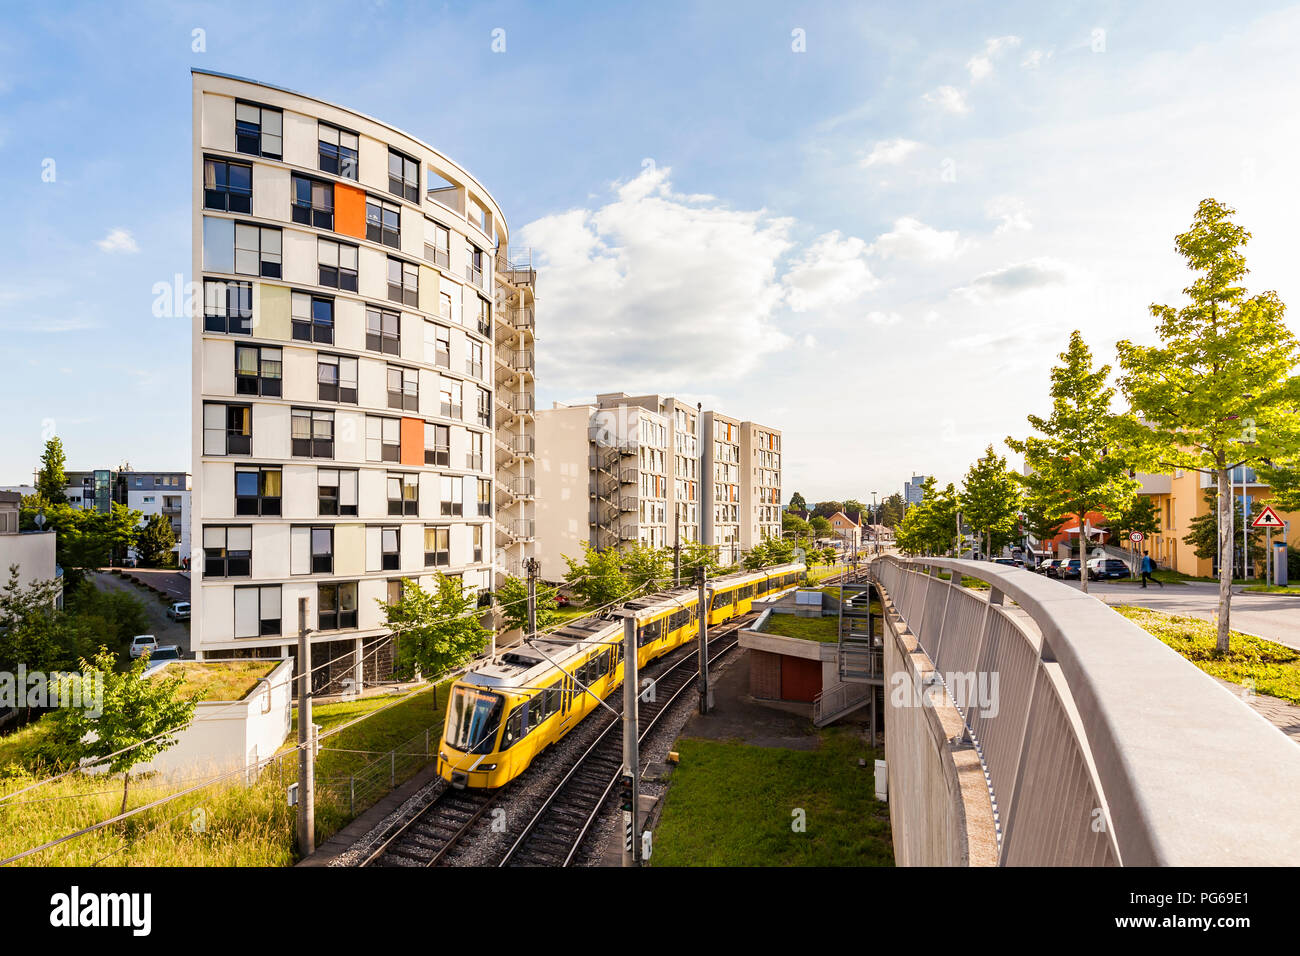 Germany, Stuttgart, high-rise residential building and tram Stock Photo